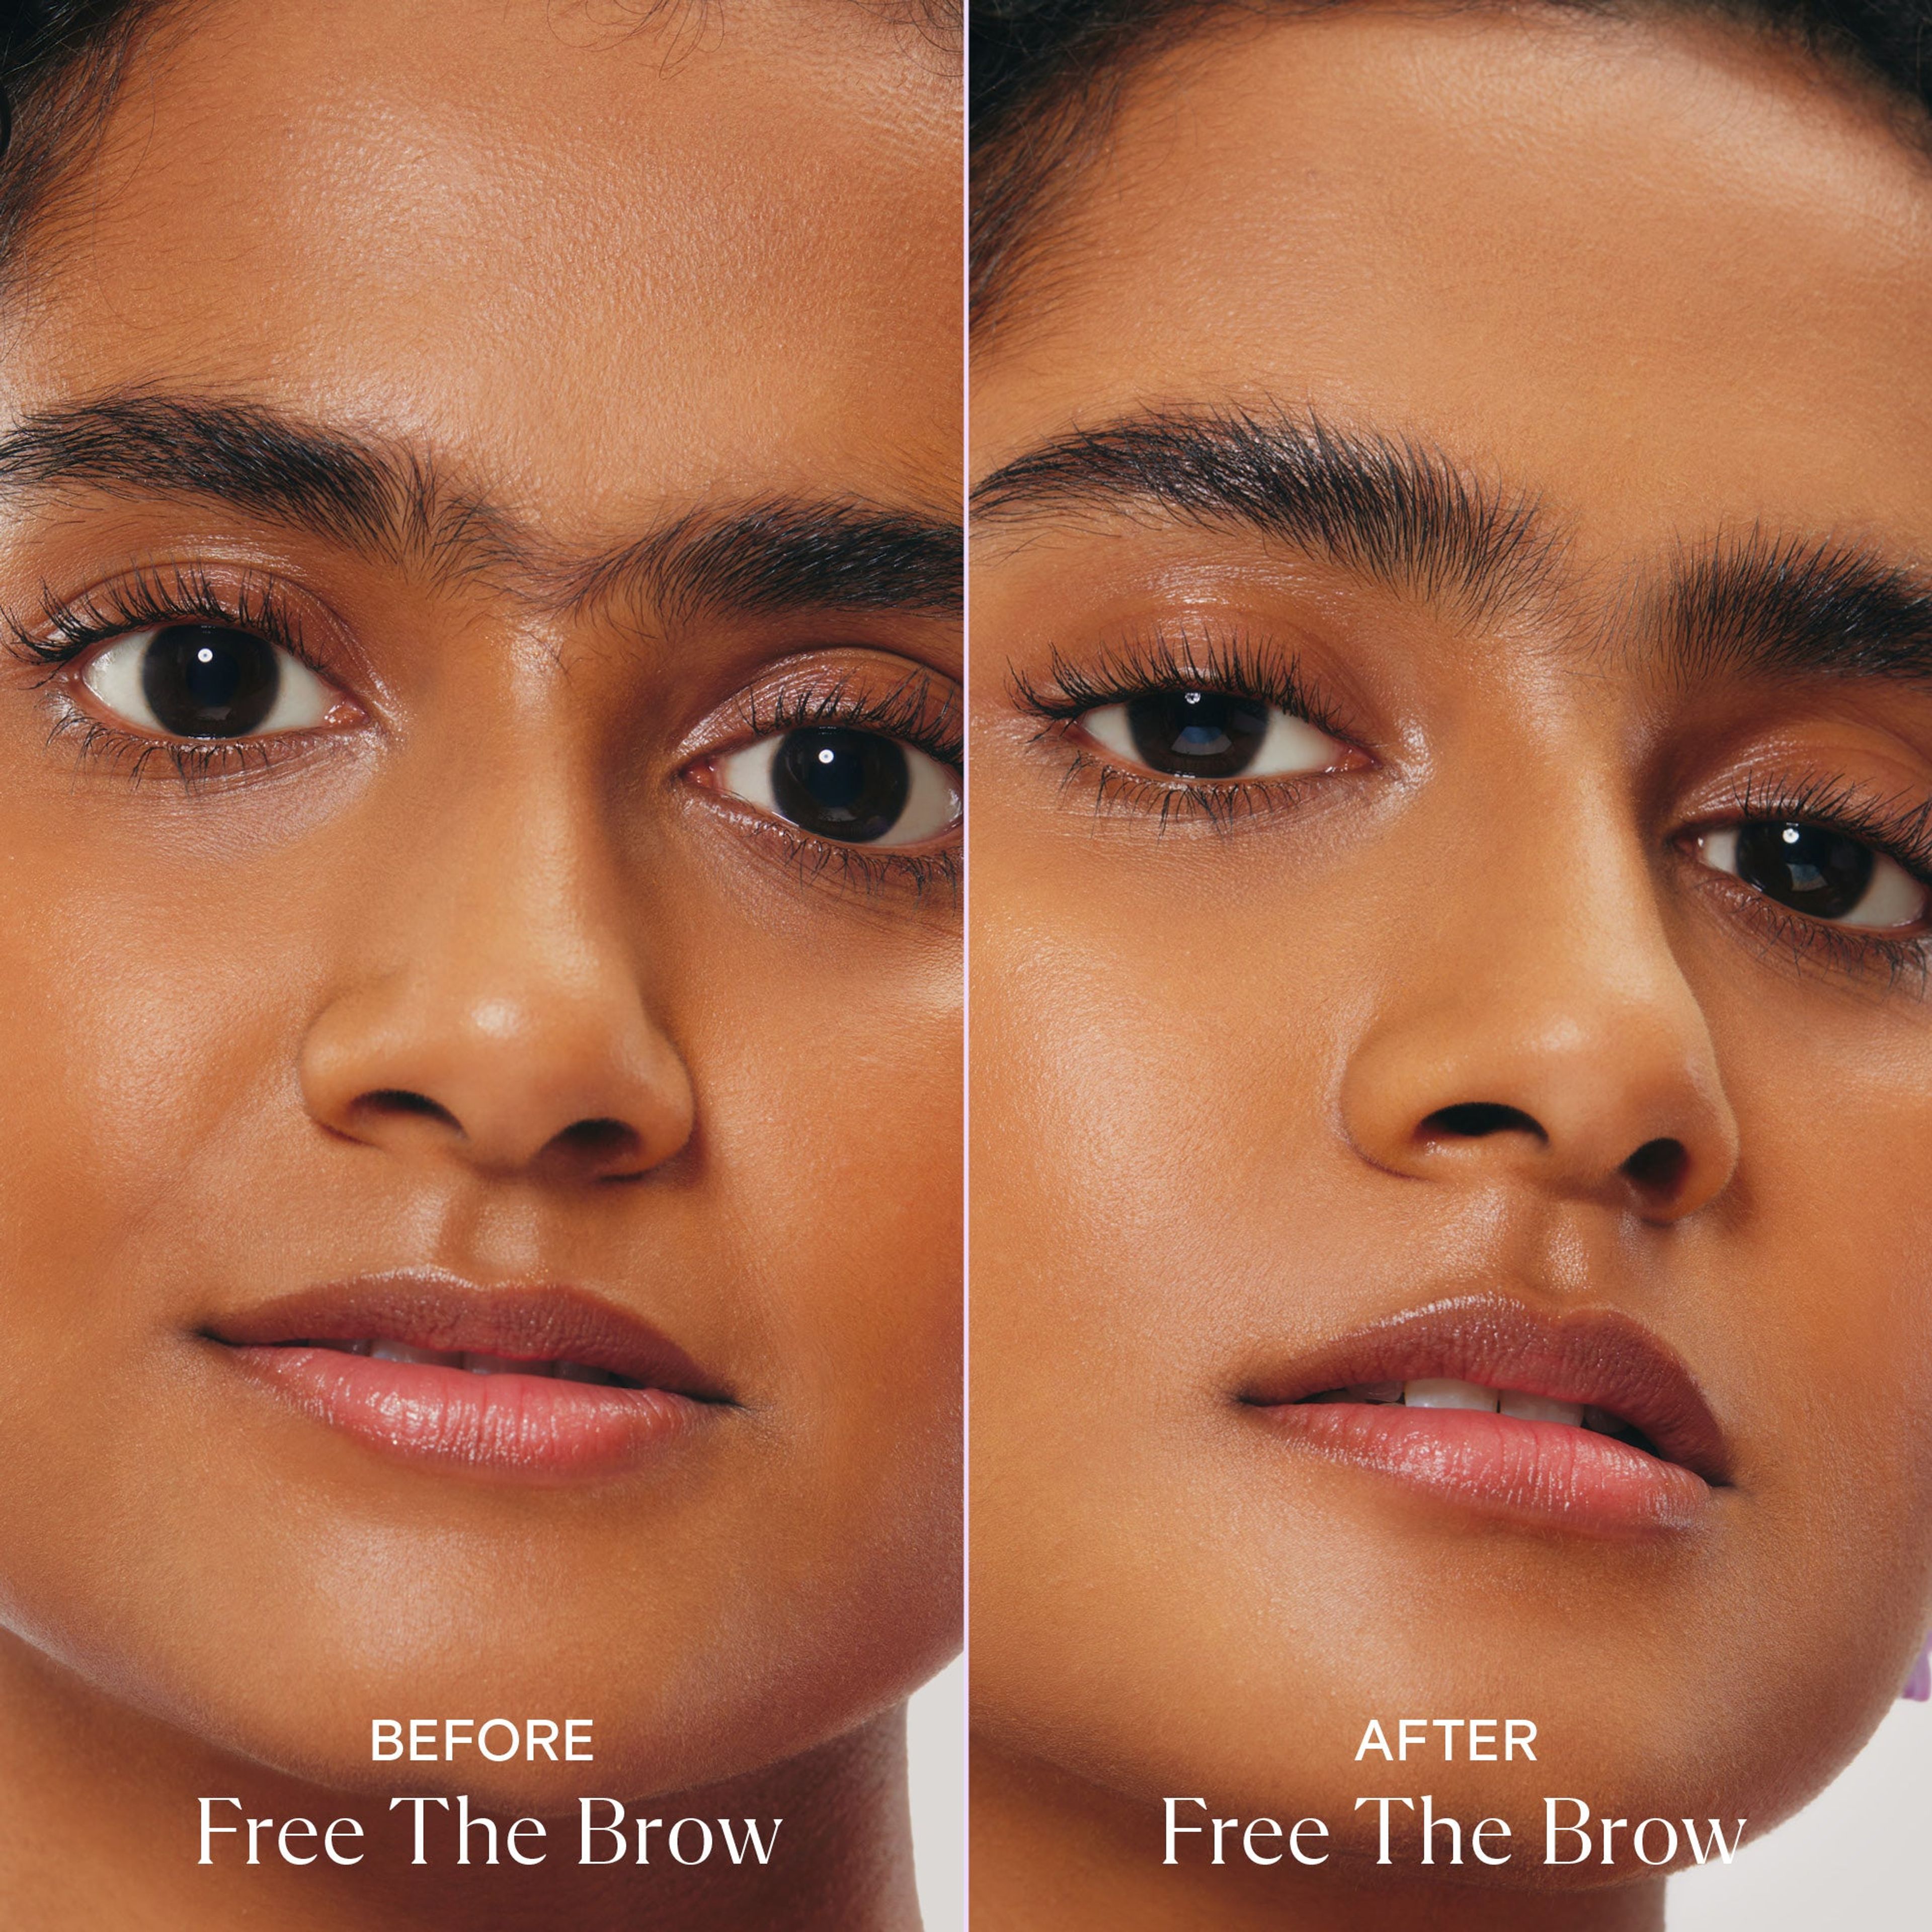 Free The Brow